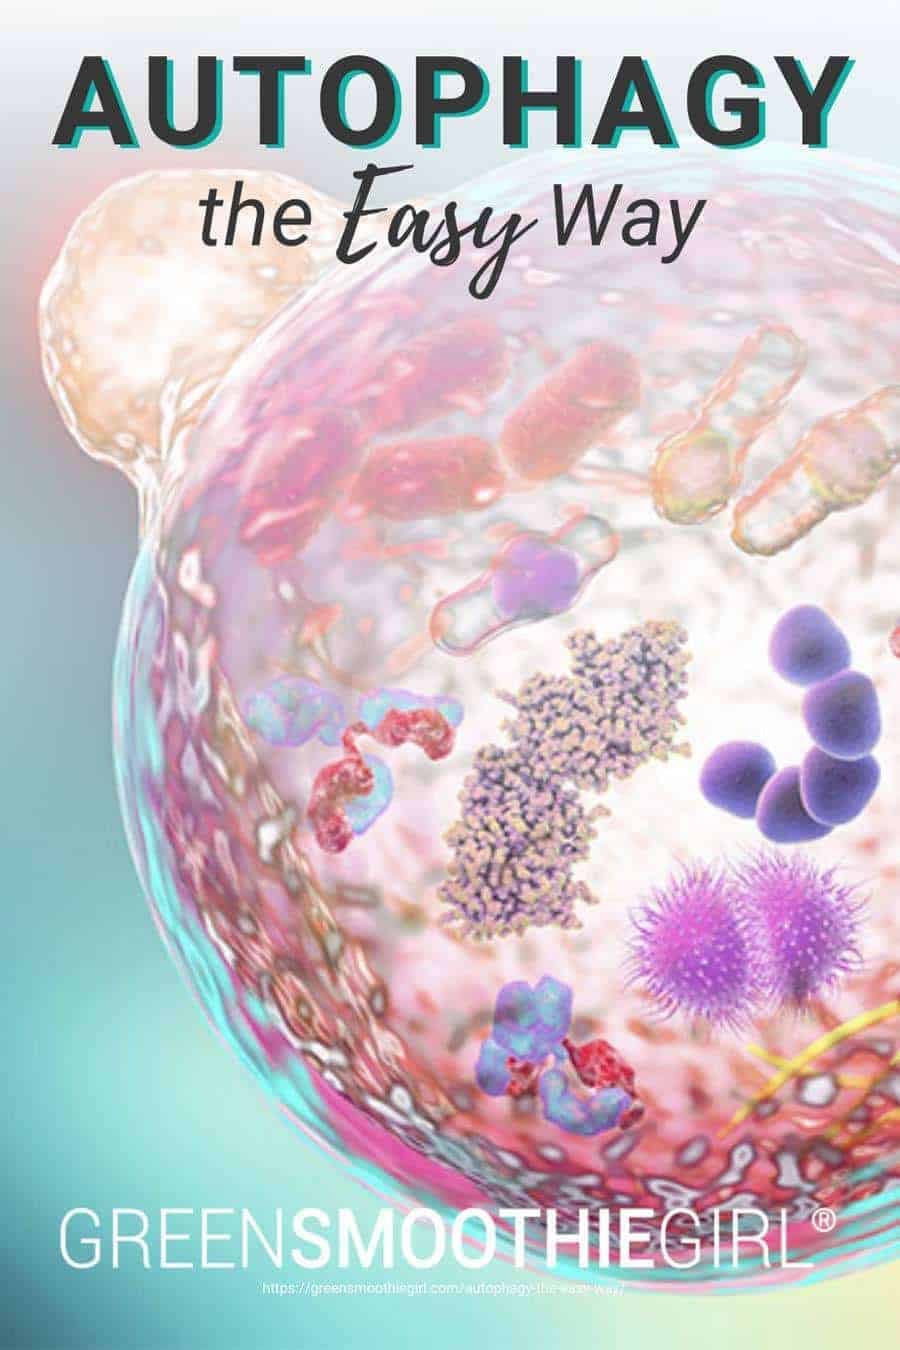 Graphic of cell and cell's components with post's title text overlaid from "Autophagy The Easy Way: How To Induce Autophagy Without Going Hungry" by Green Smoothie Girl